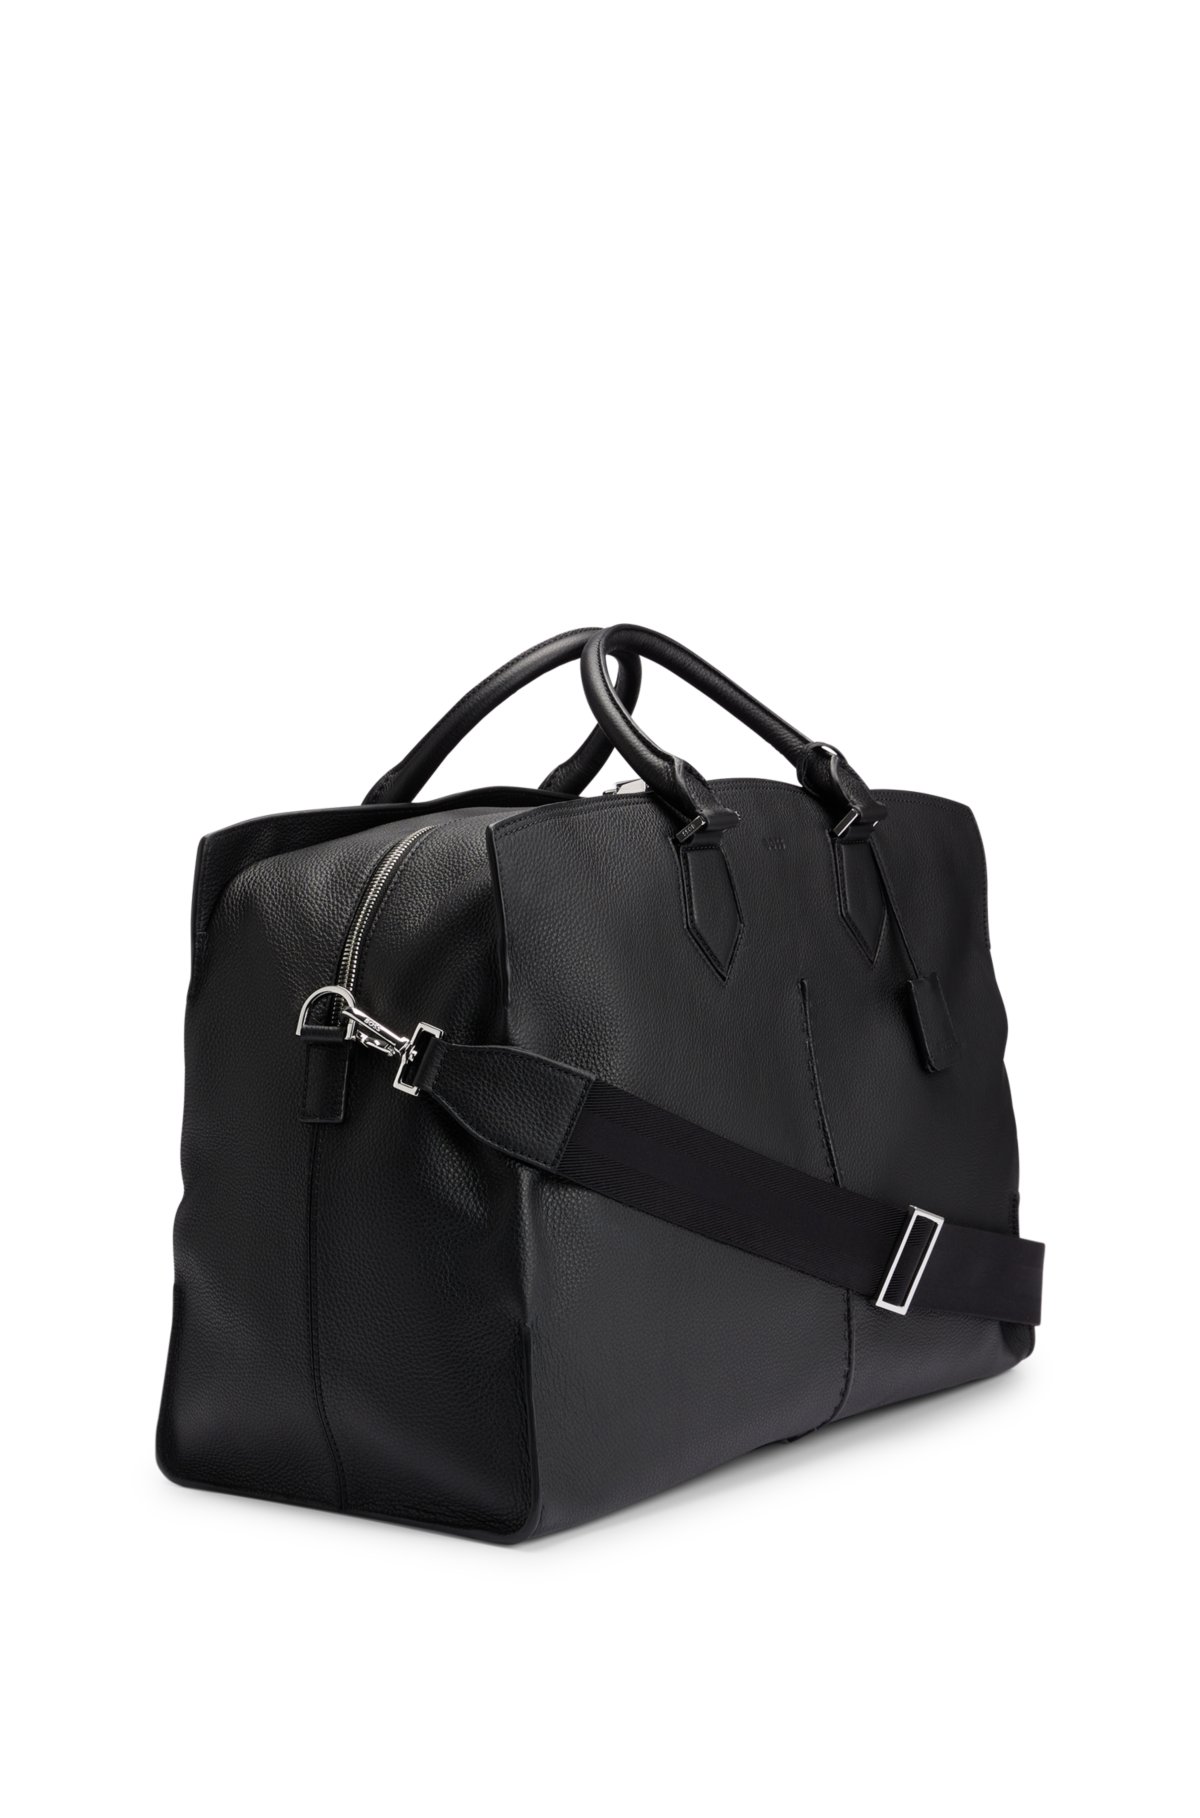 Holdall in Grained Italian Leather with Embossed Logo- Black | Men's Business Bags